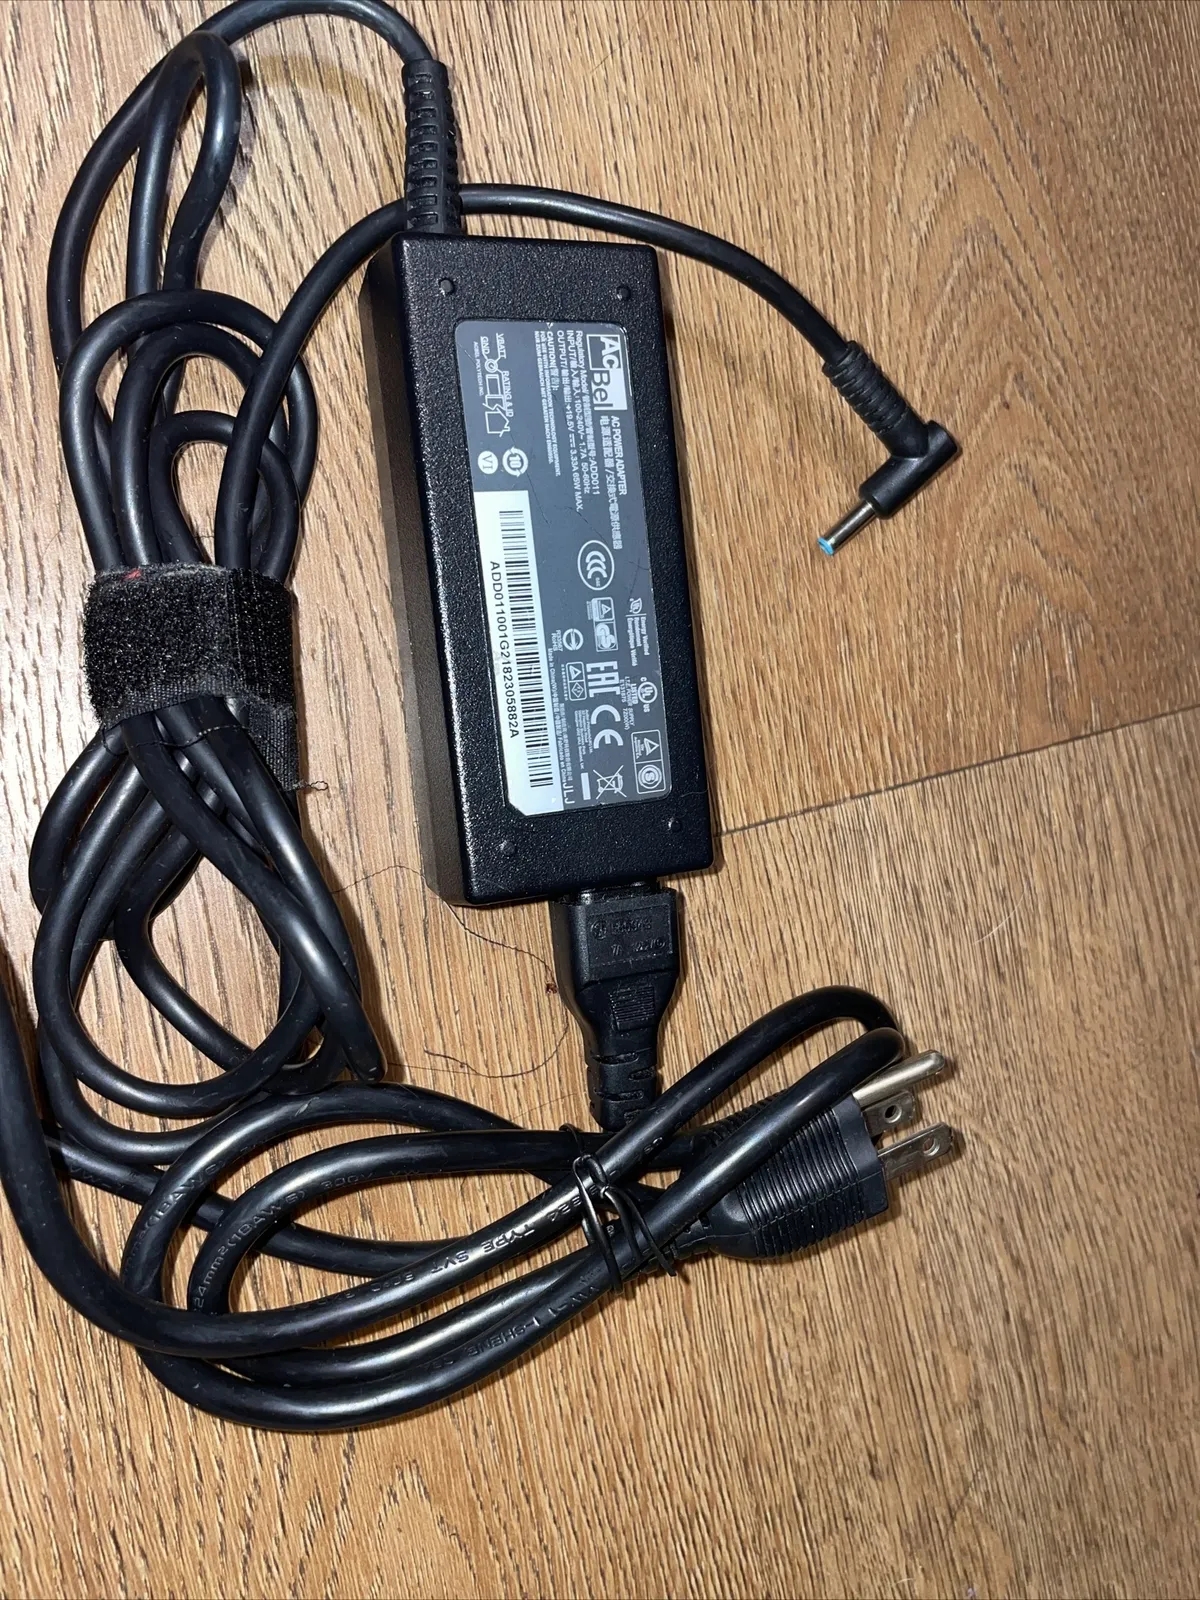 *Brand NEW*ACBEL 19.5V 3.33A AC ADAPTER ADD011 Power Supply - Click Image to Close